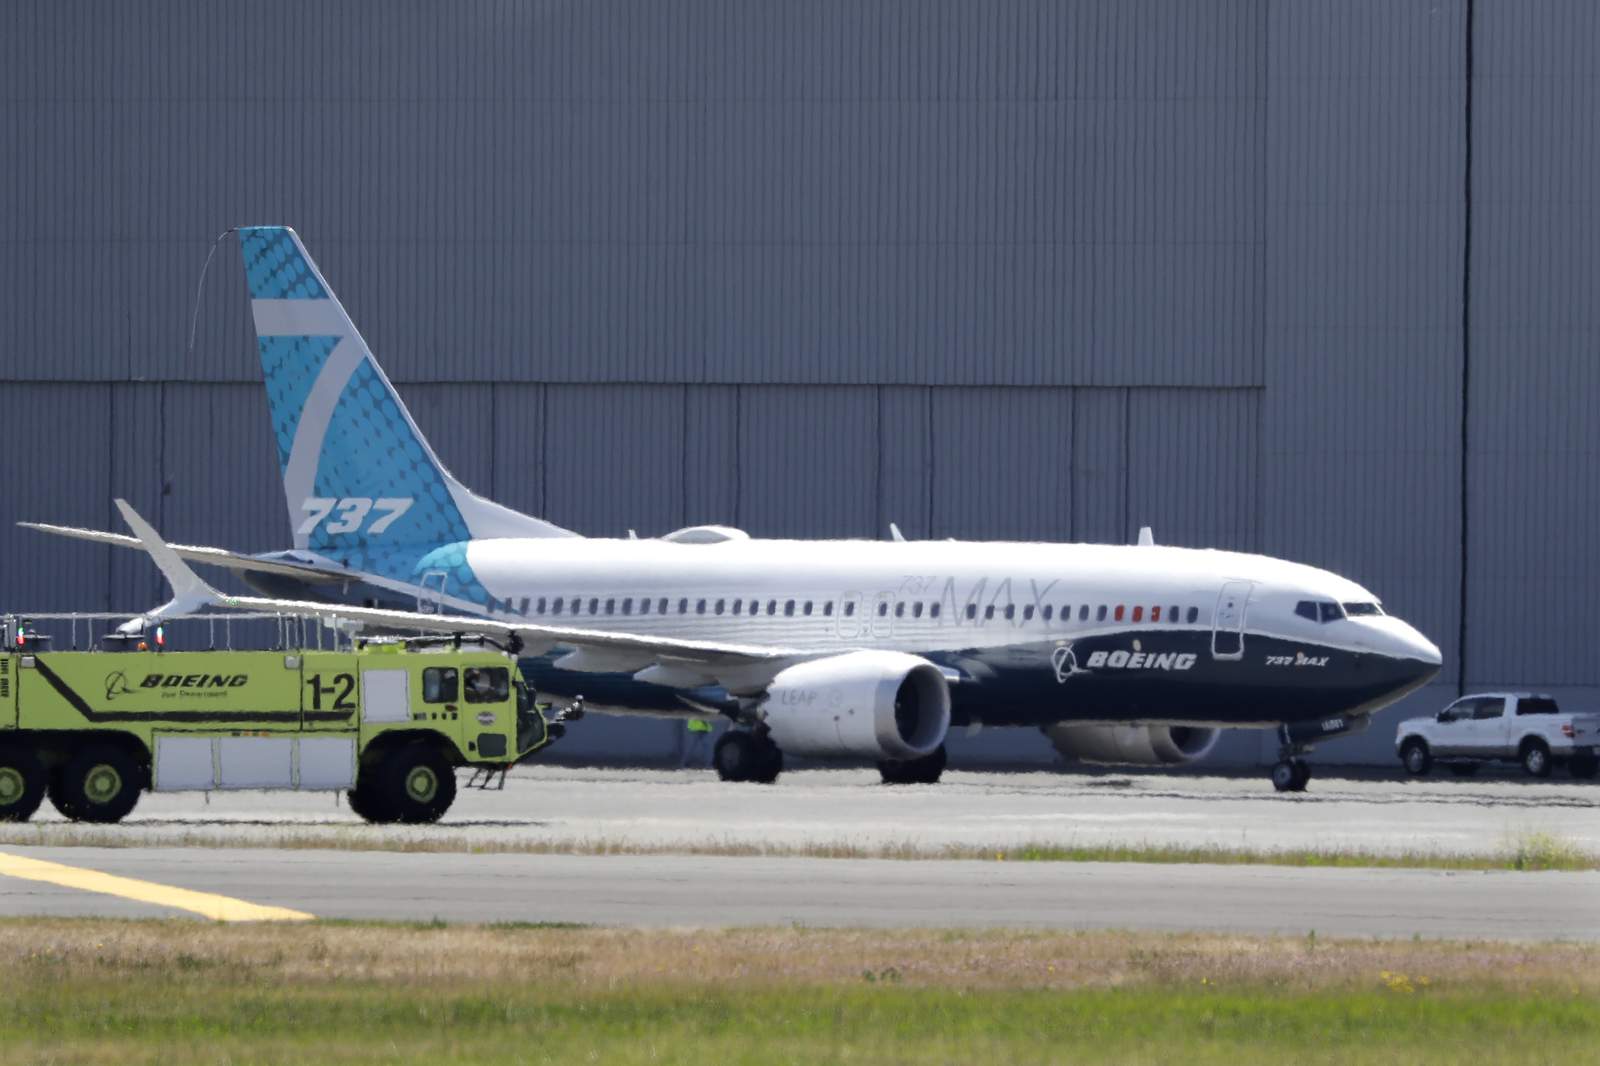 Boeing will pay $2.5 billion to settle charge over 737 Max